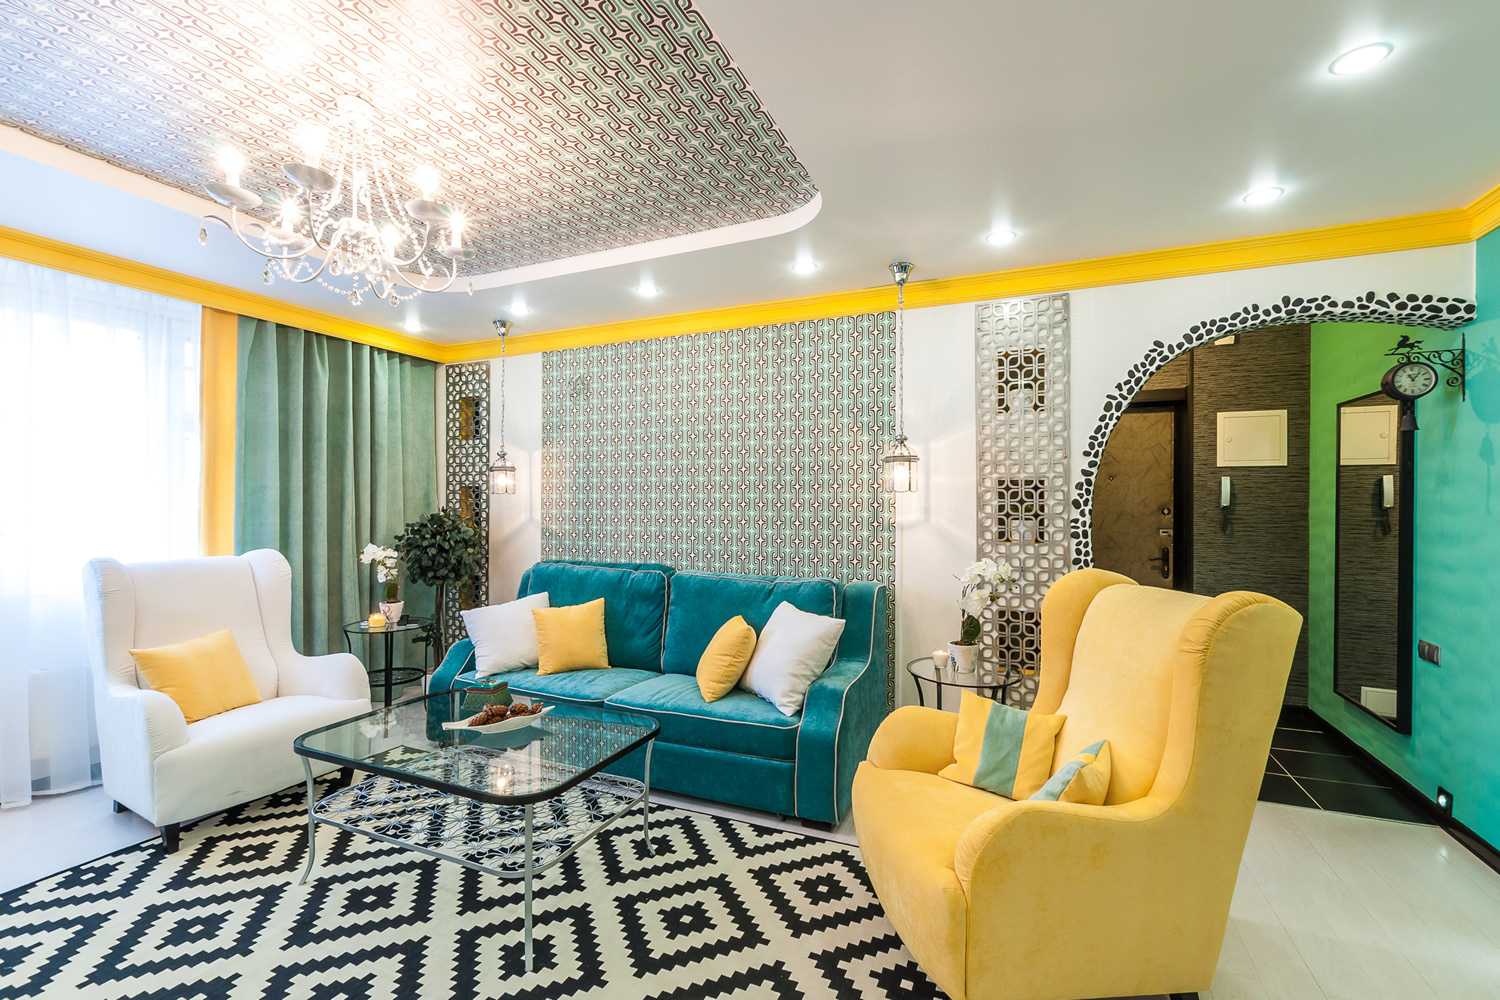 beautiful home style in mustard color